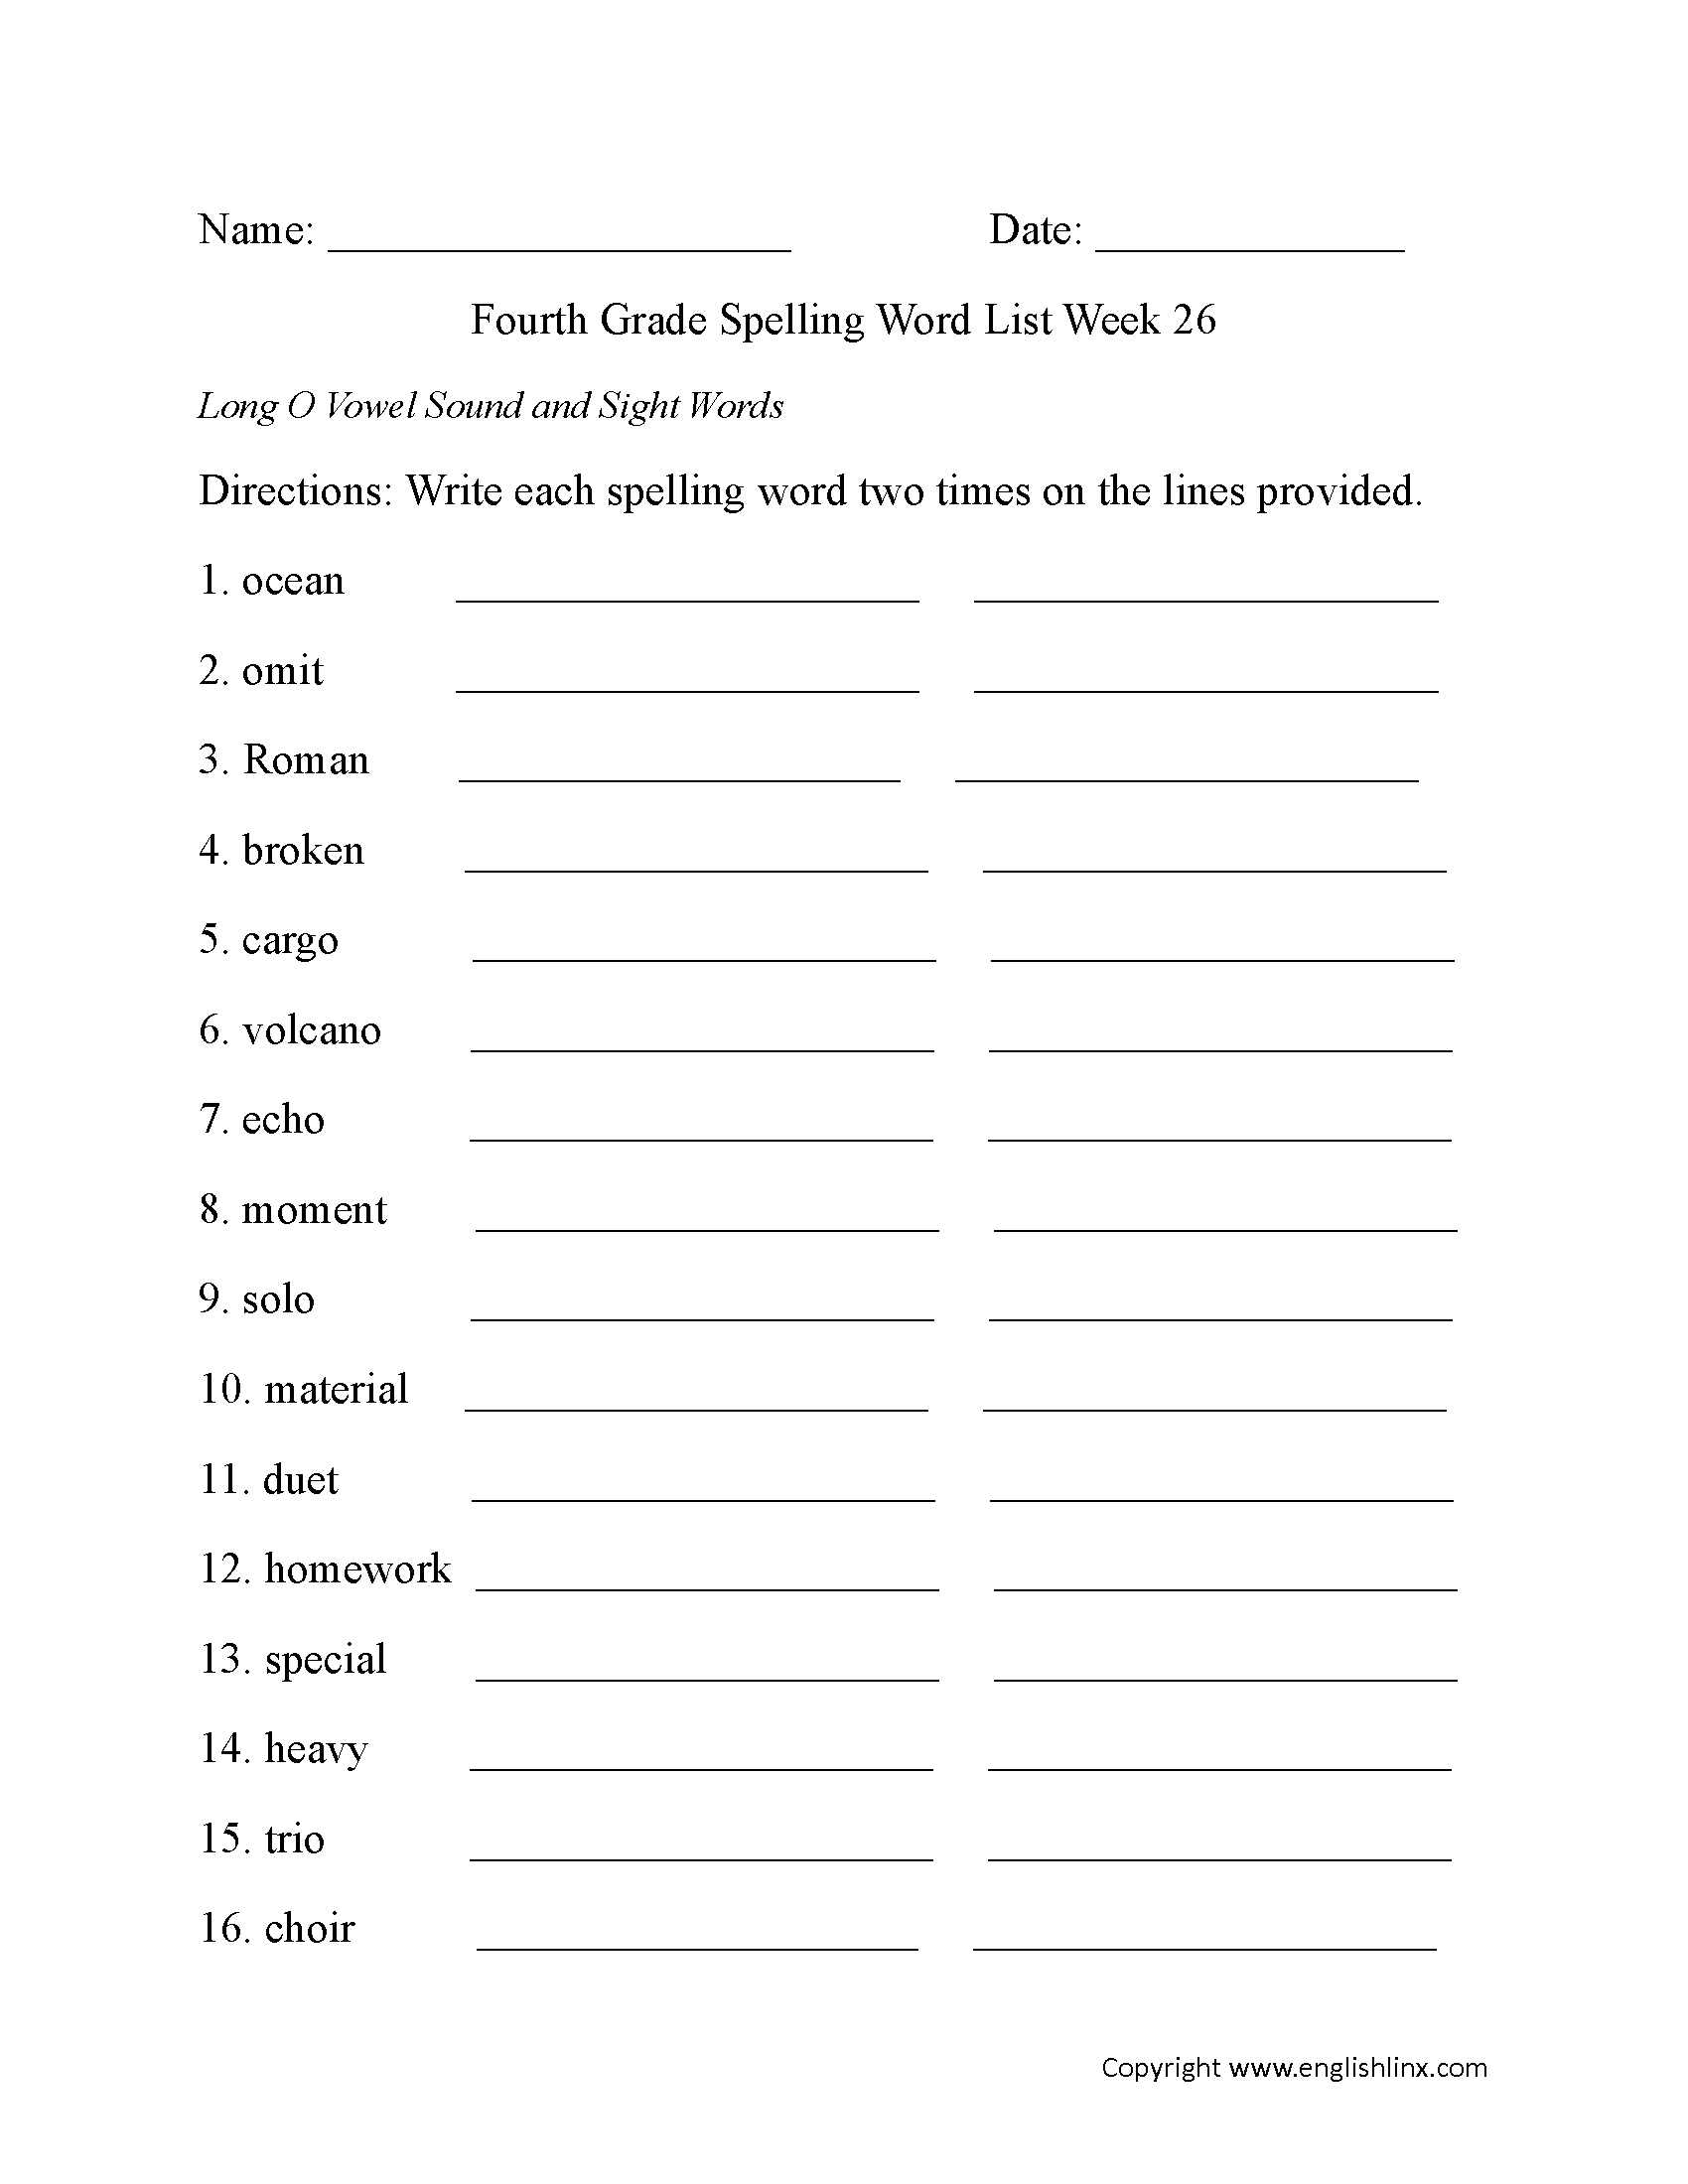 Week 26 Long O Vowel and Sight Words Fourth Grade Spelling Words Worksheets